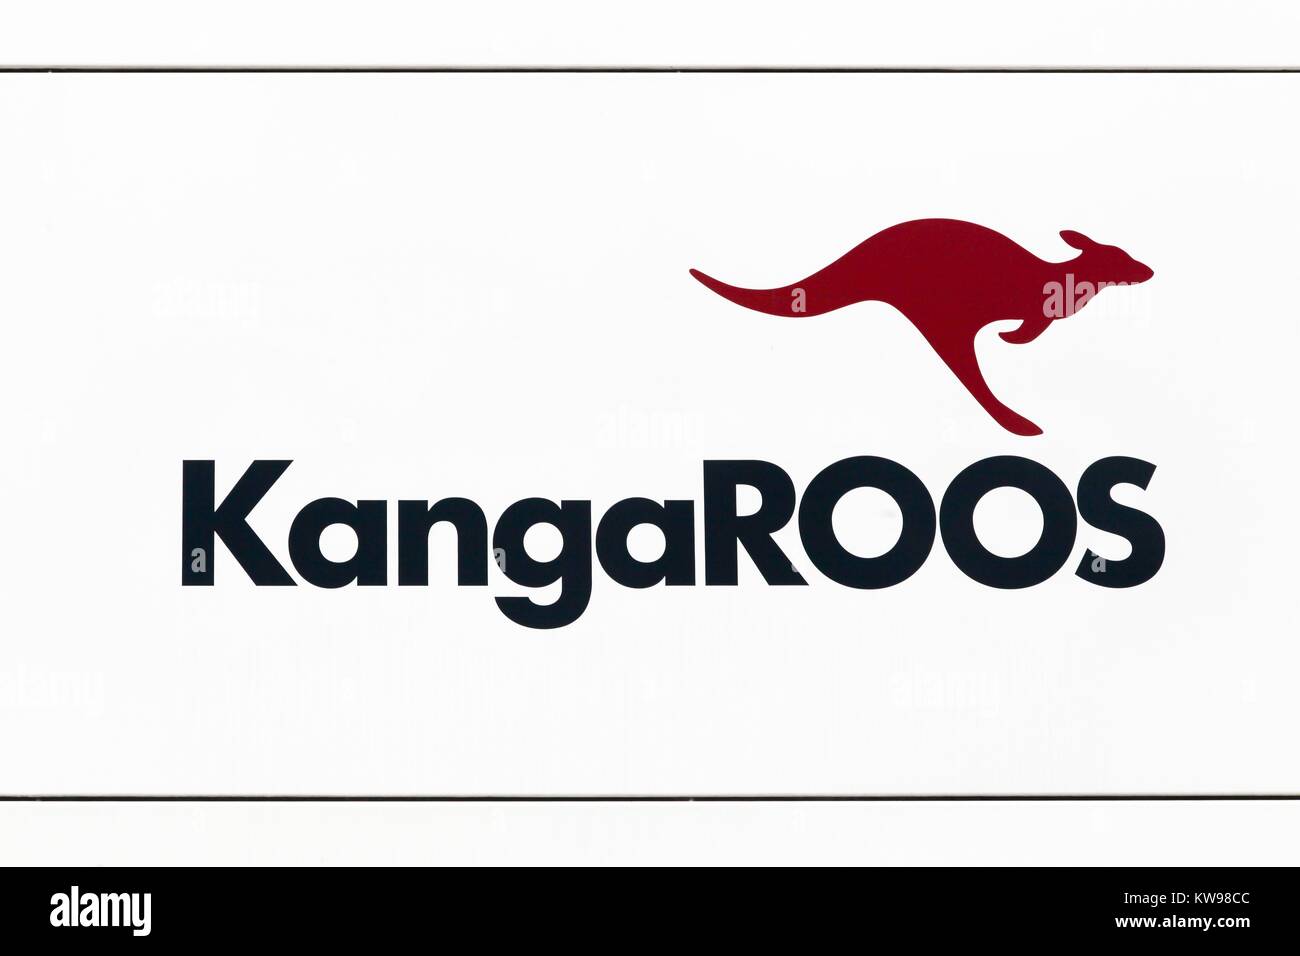 Kangaroos Cut Out Stock Images & Pictures - Alamy